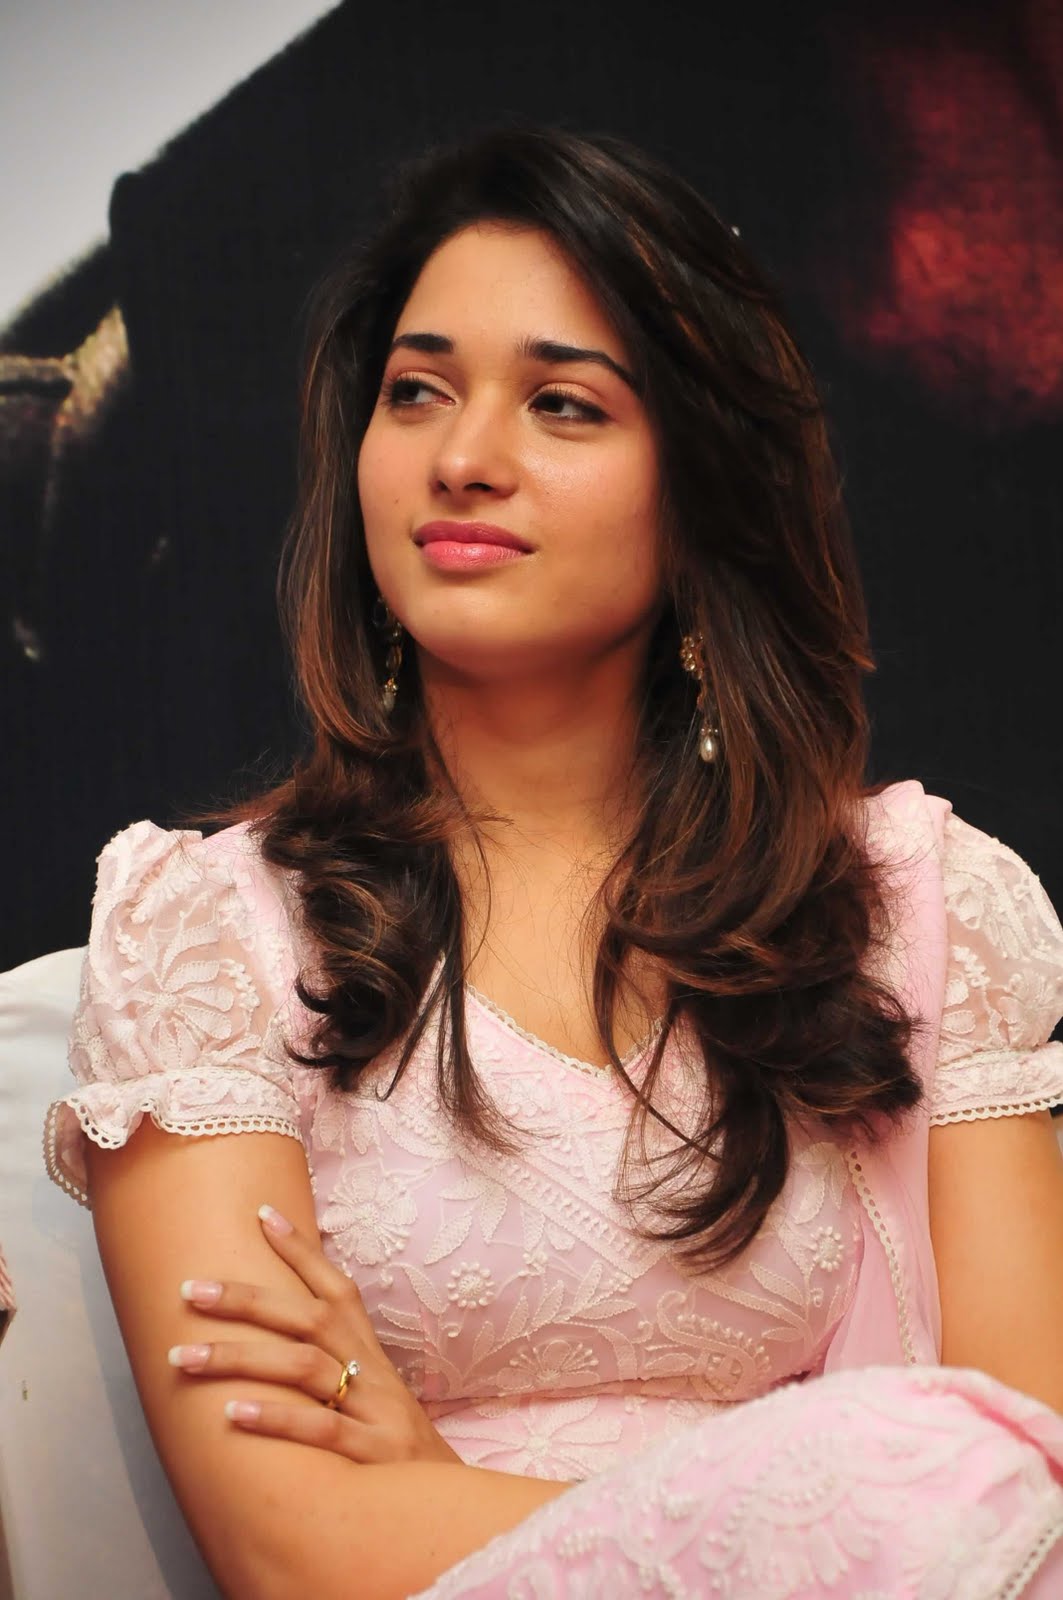 COOL PICTURE: Tamanna new actress of south India...........must watch